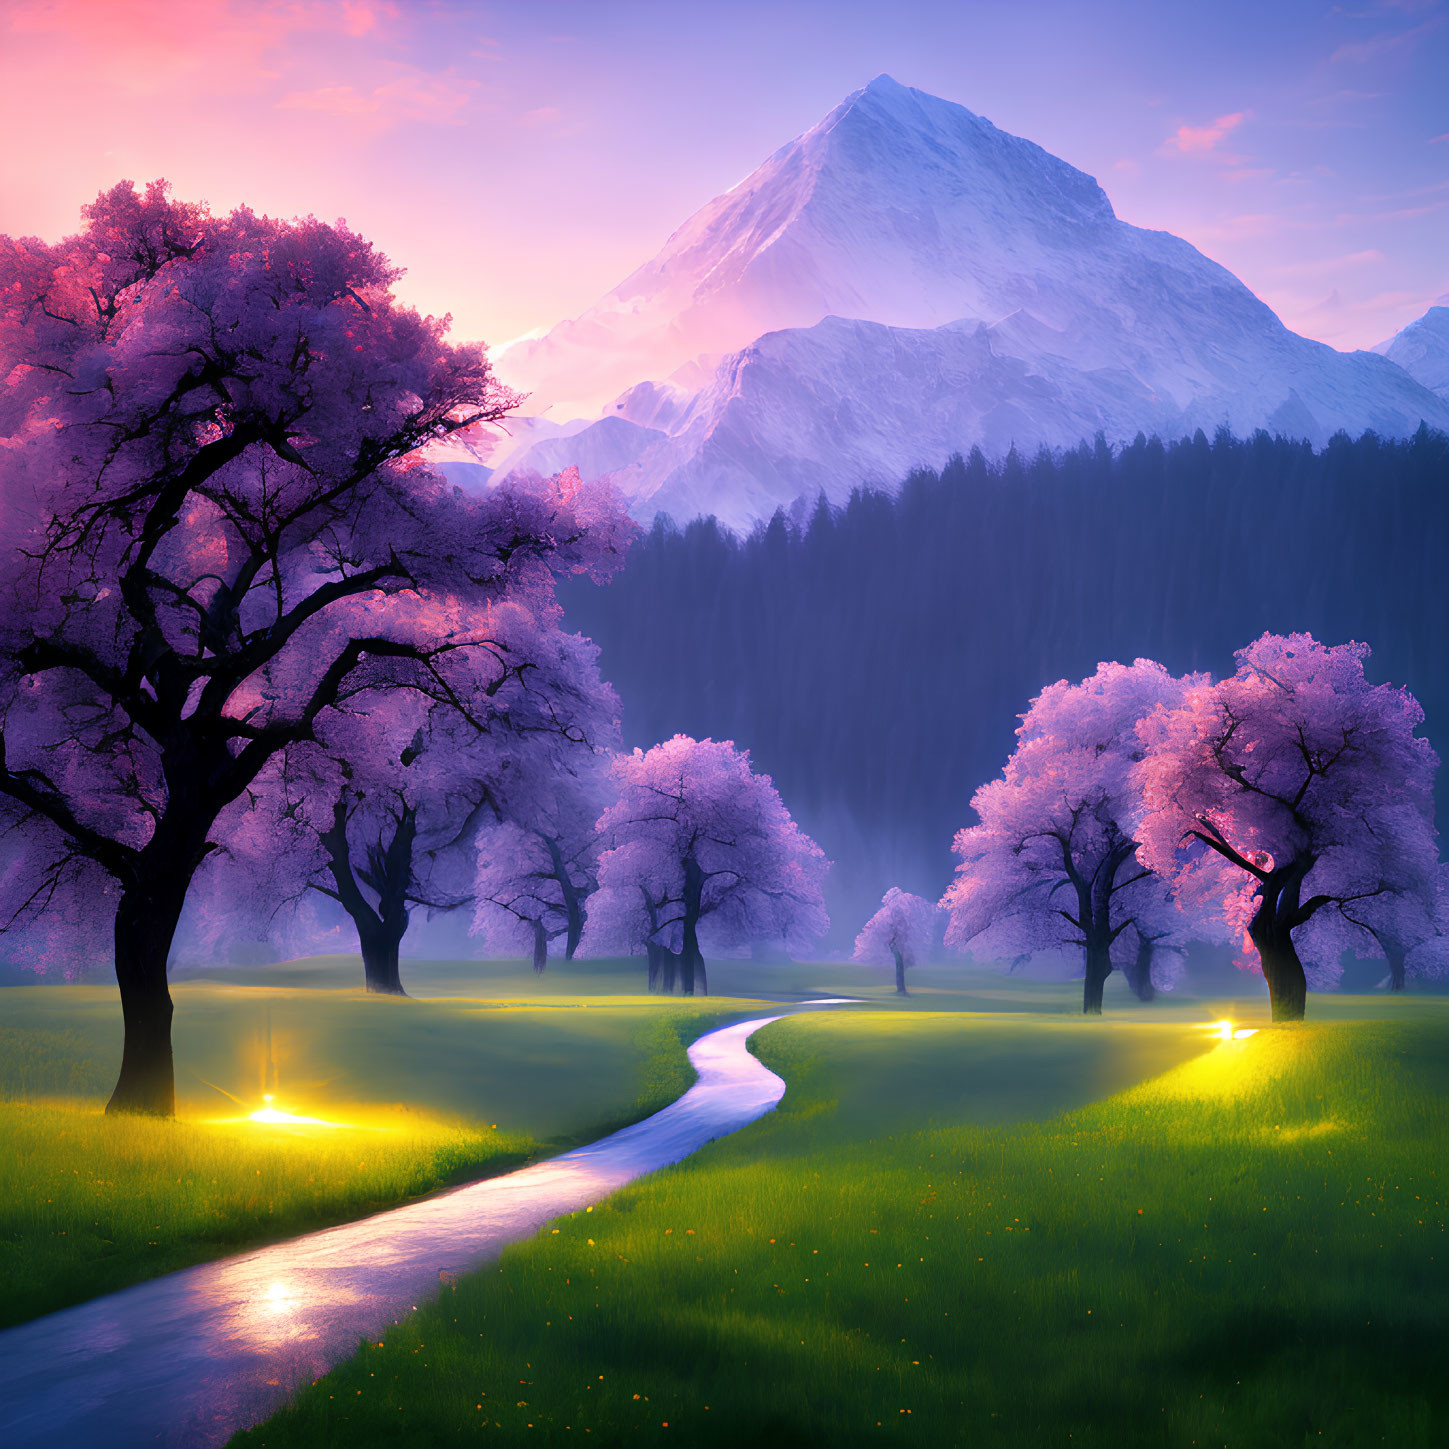 Pink Trees and Snowy Mountains in Serene Landscape at Dawn or Dusk